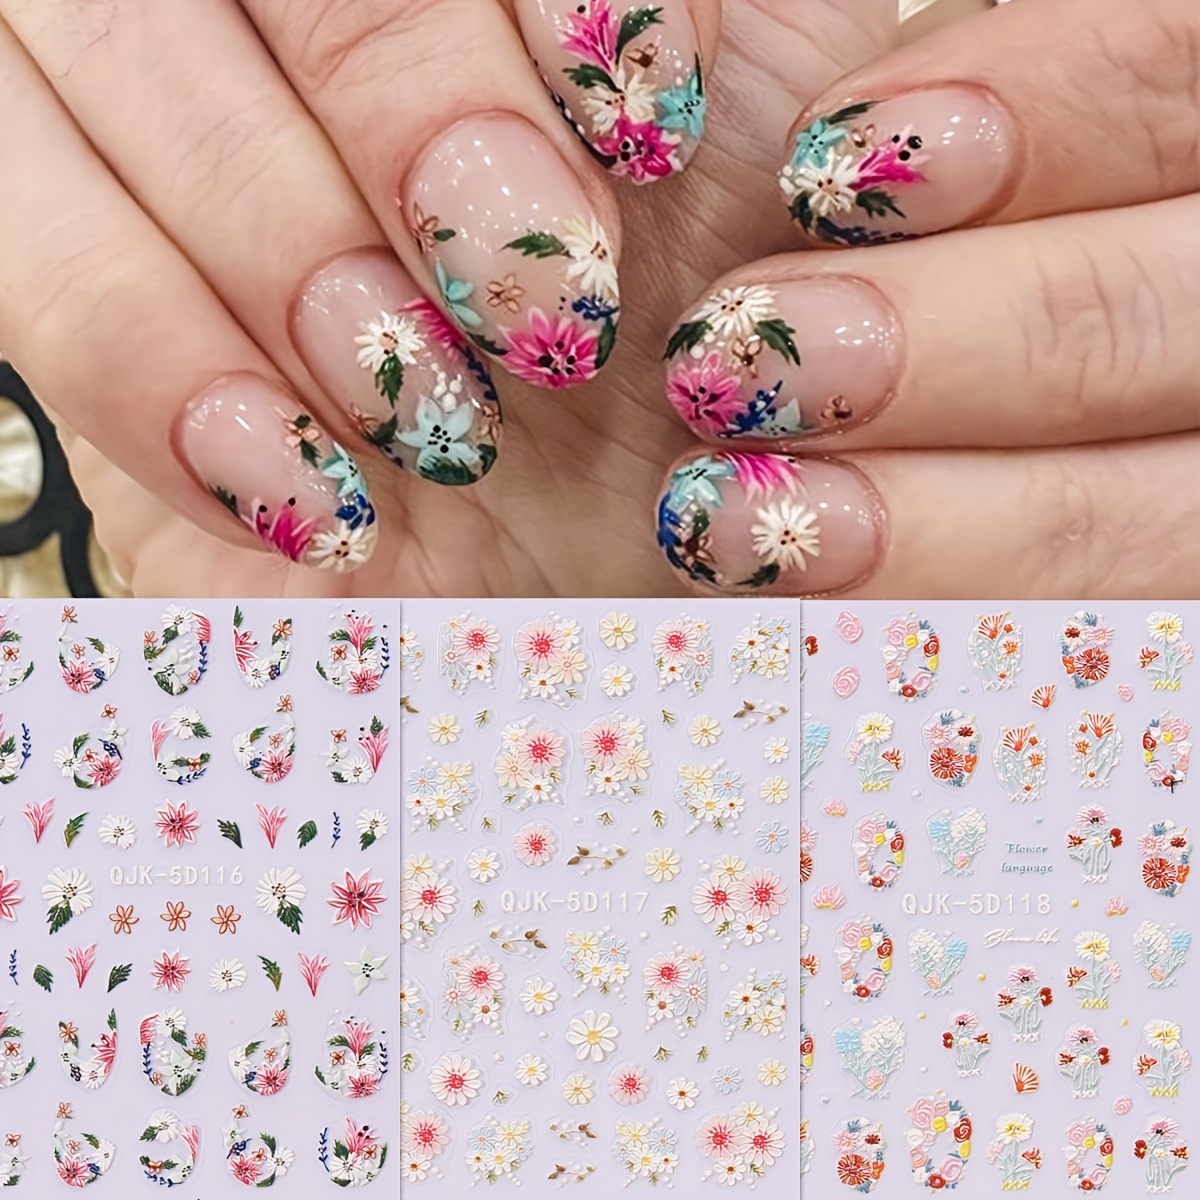 

3-piece Spring & Summer Floral 5d Embossed French Nail Art Stickers - Self-adhesive, Sparkle Finish Decals For Easy Diy Manicure